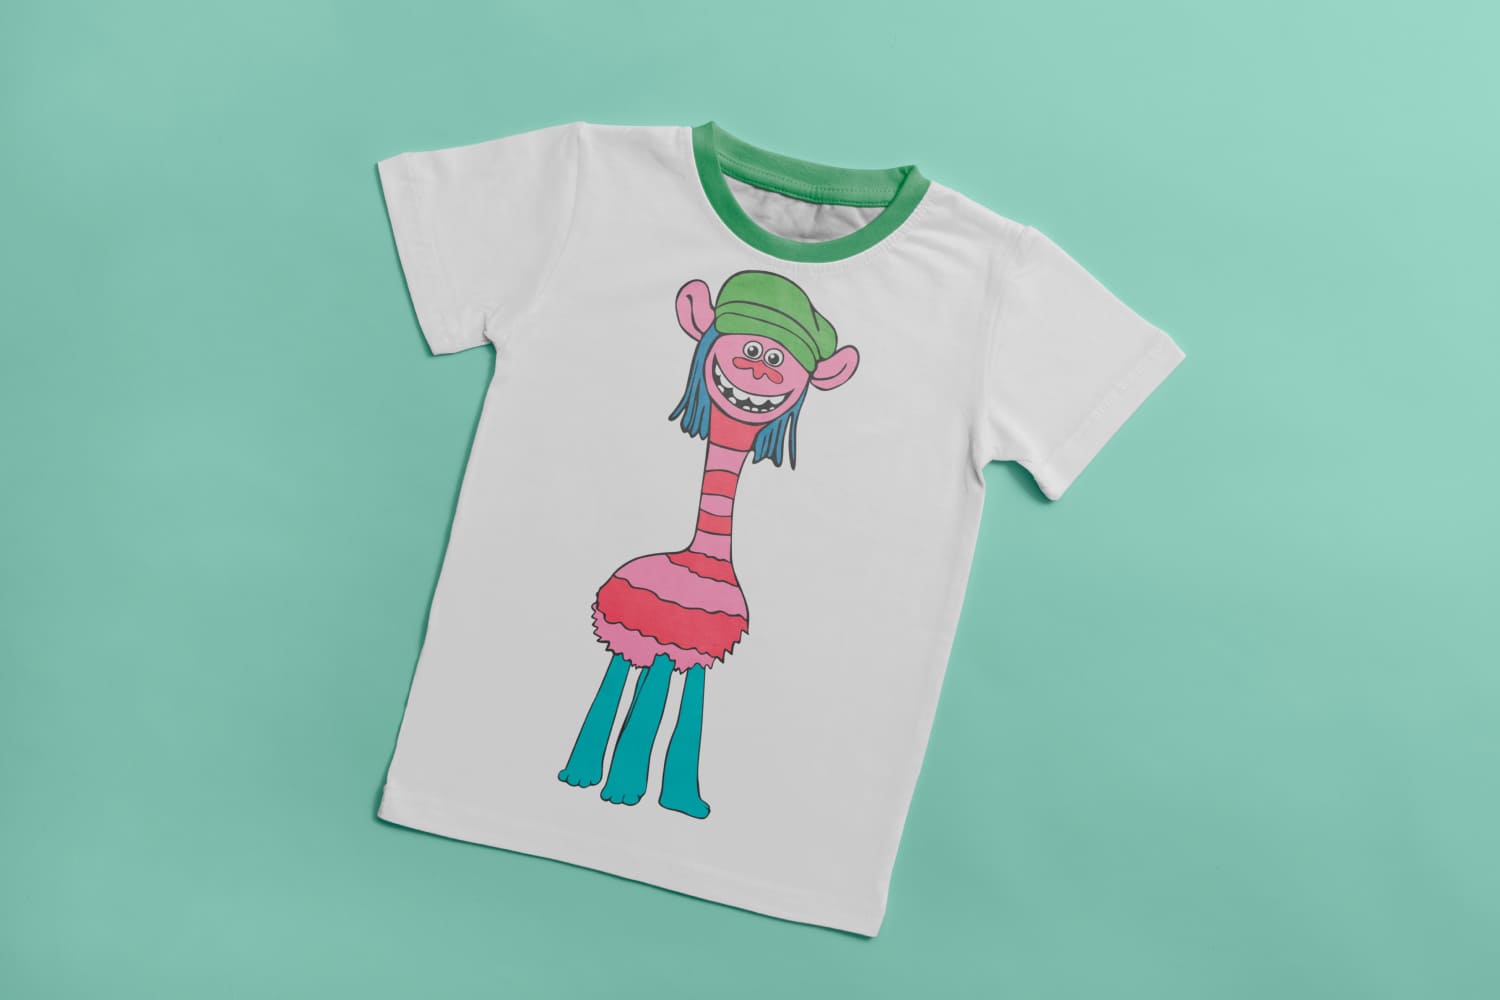 White T-shirt with green collar and image of cartoon character - Cooper.